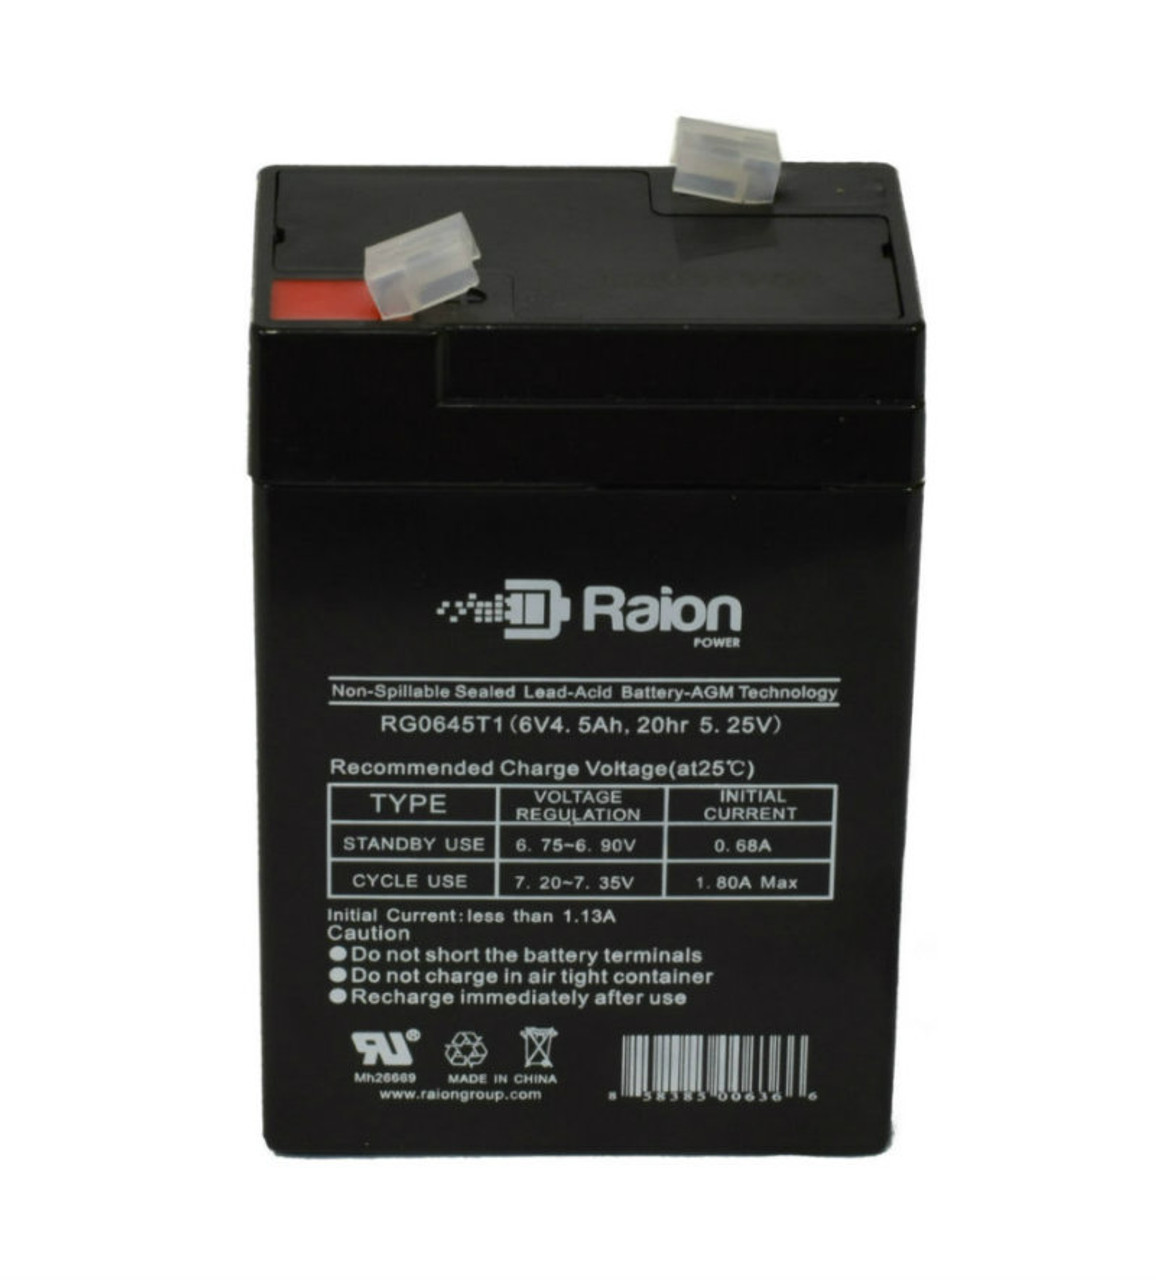 Raion Power RG0645T1 Replacement Battery Cartridge for AJC C4S